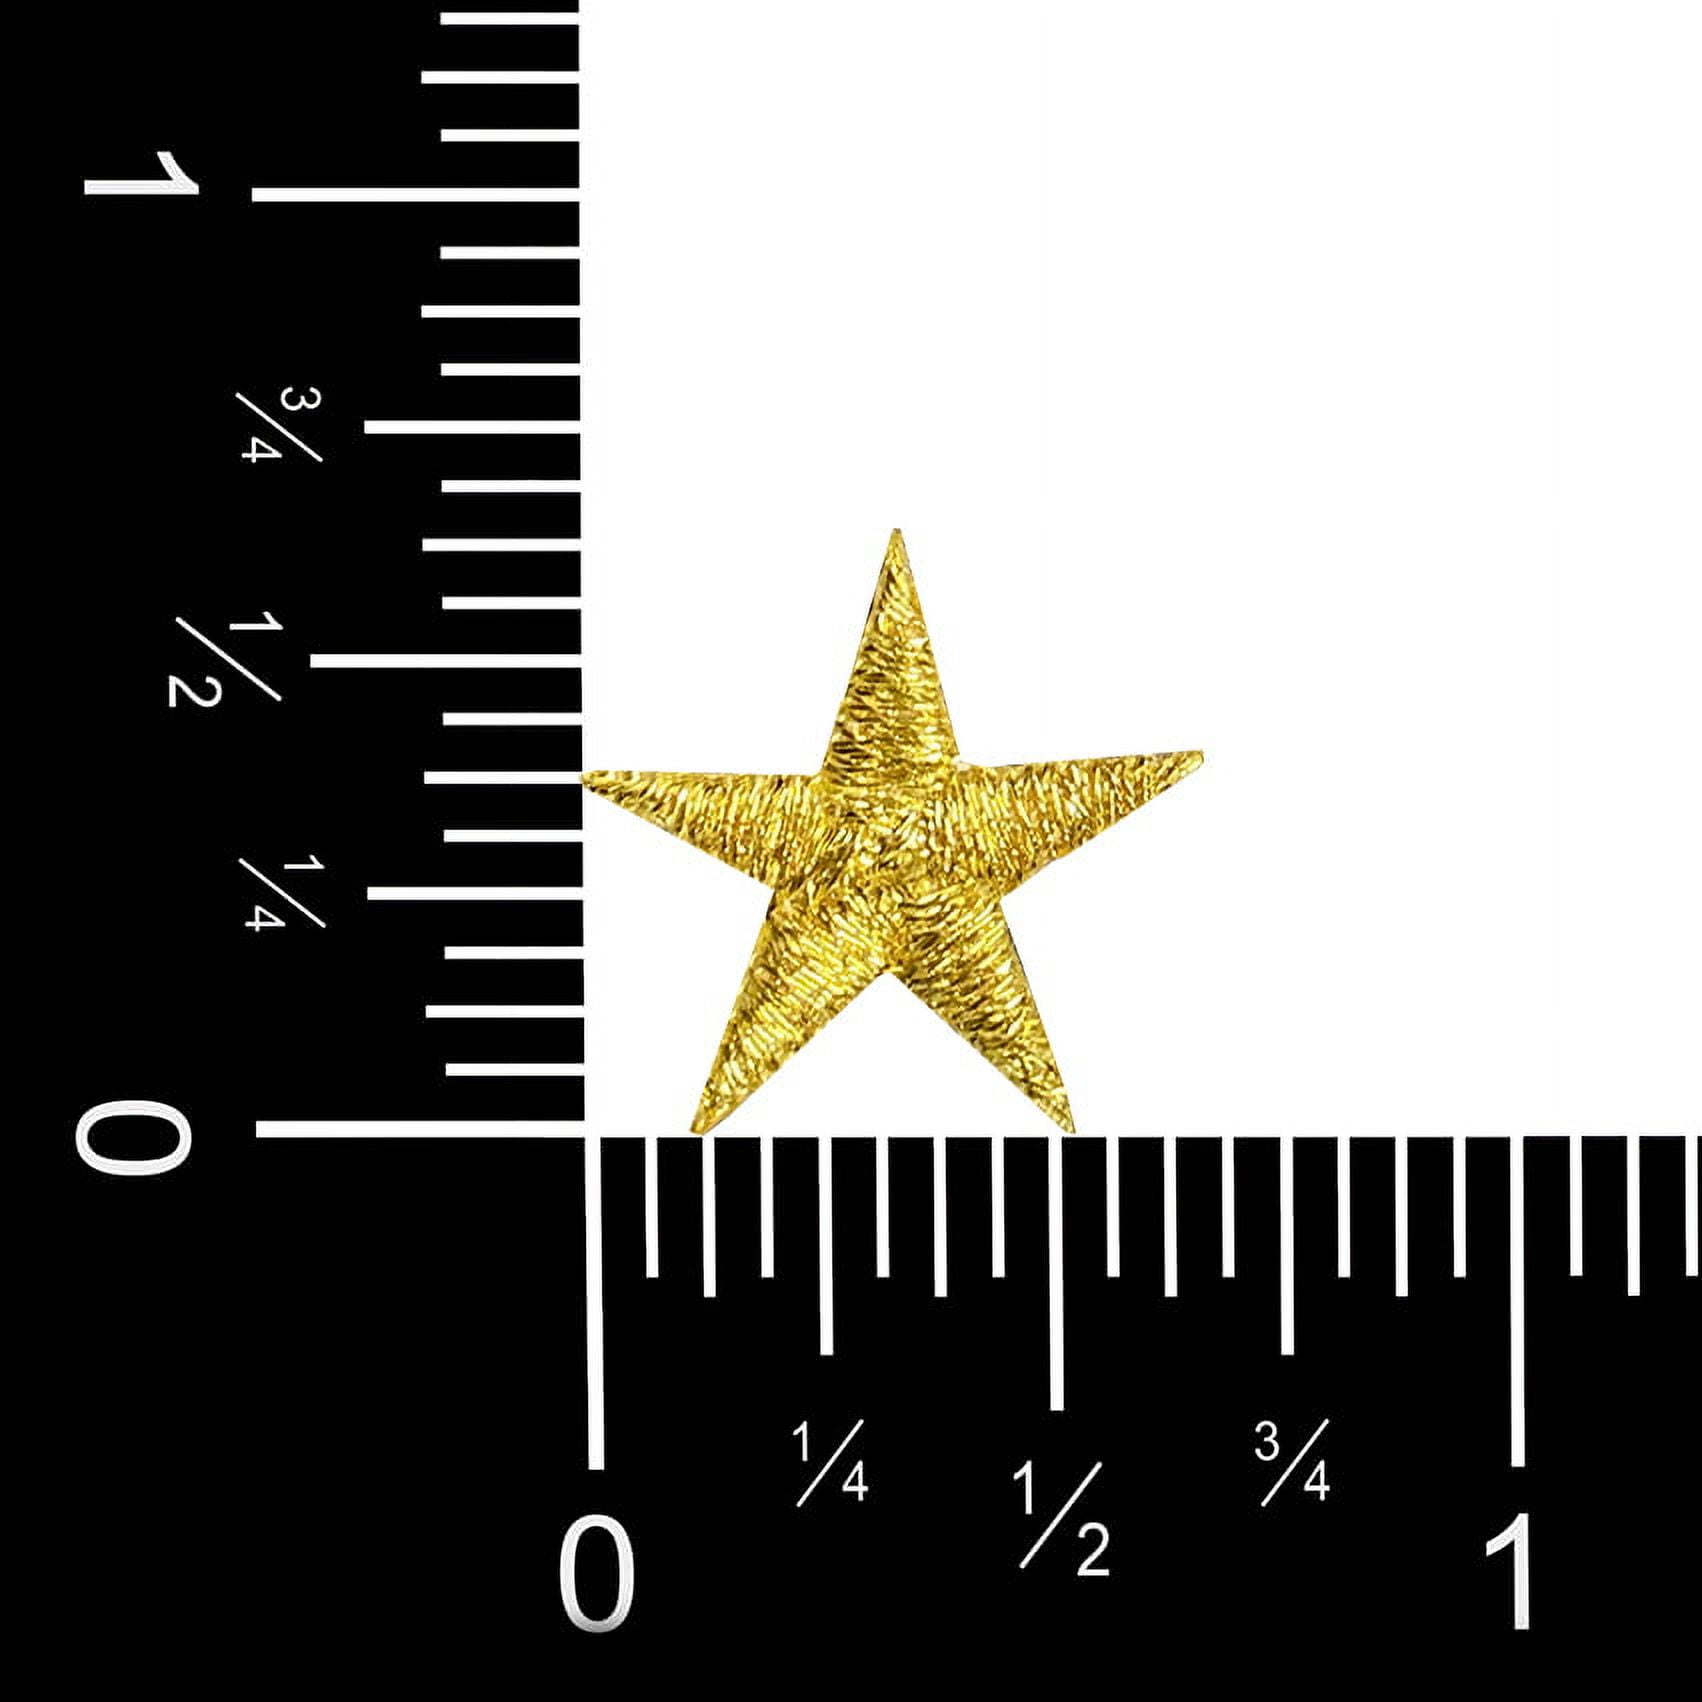  Gold Star Patch 5 Pieces Tiny Gold uKET Embroidery Star Patches  with Fine Metallic Thread. Iron on Backing 1.25 inches : Arts, Crafts &  Sewing